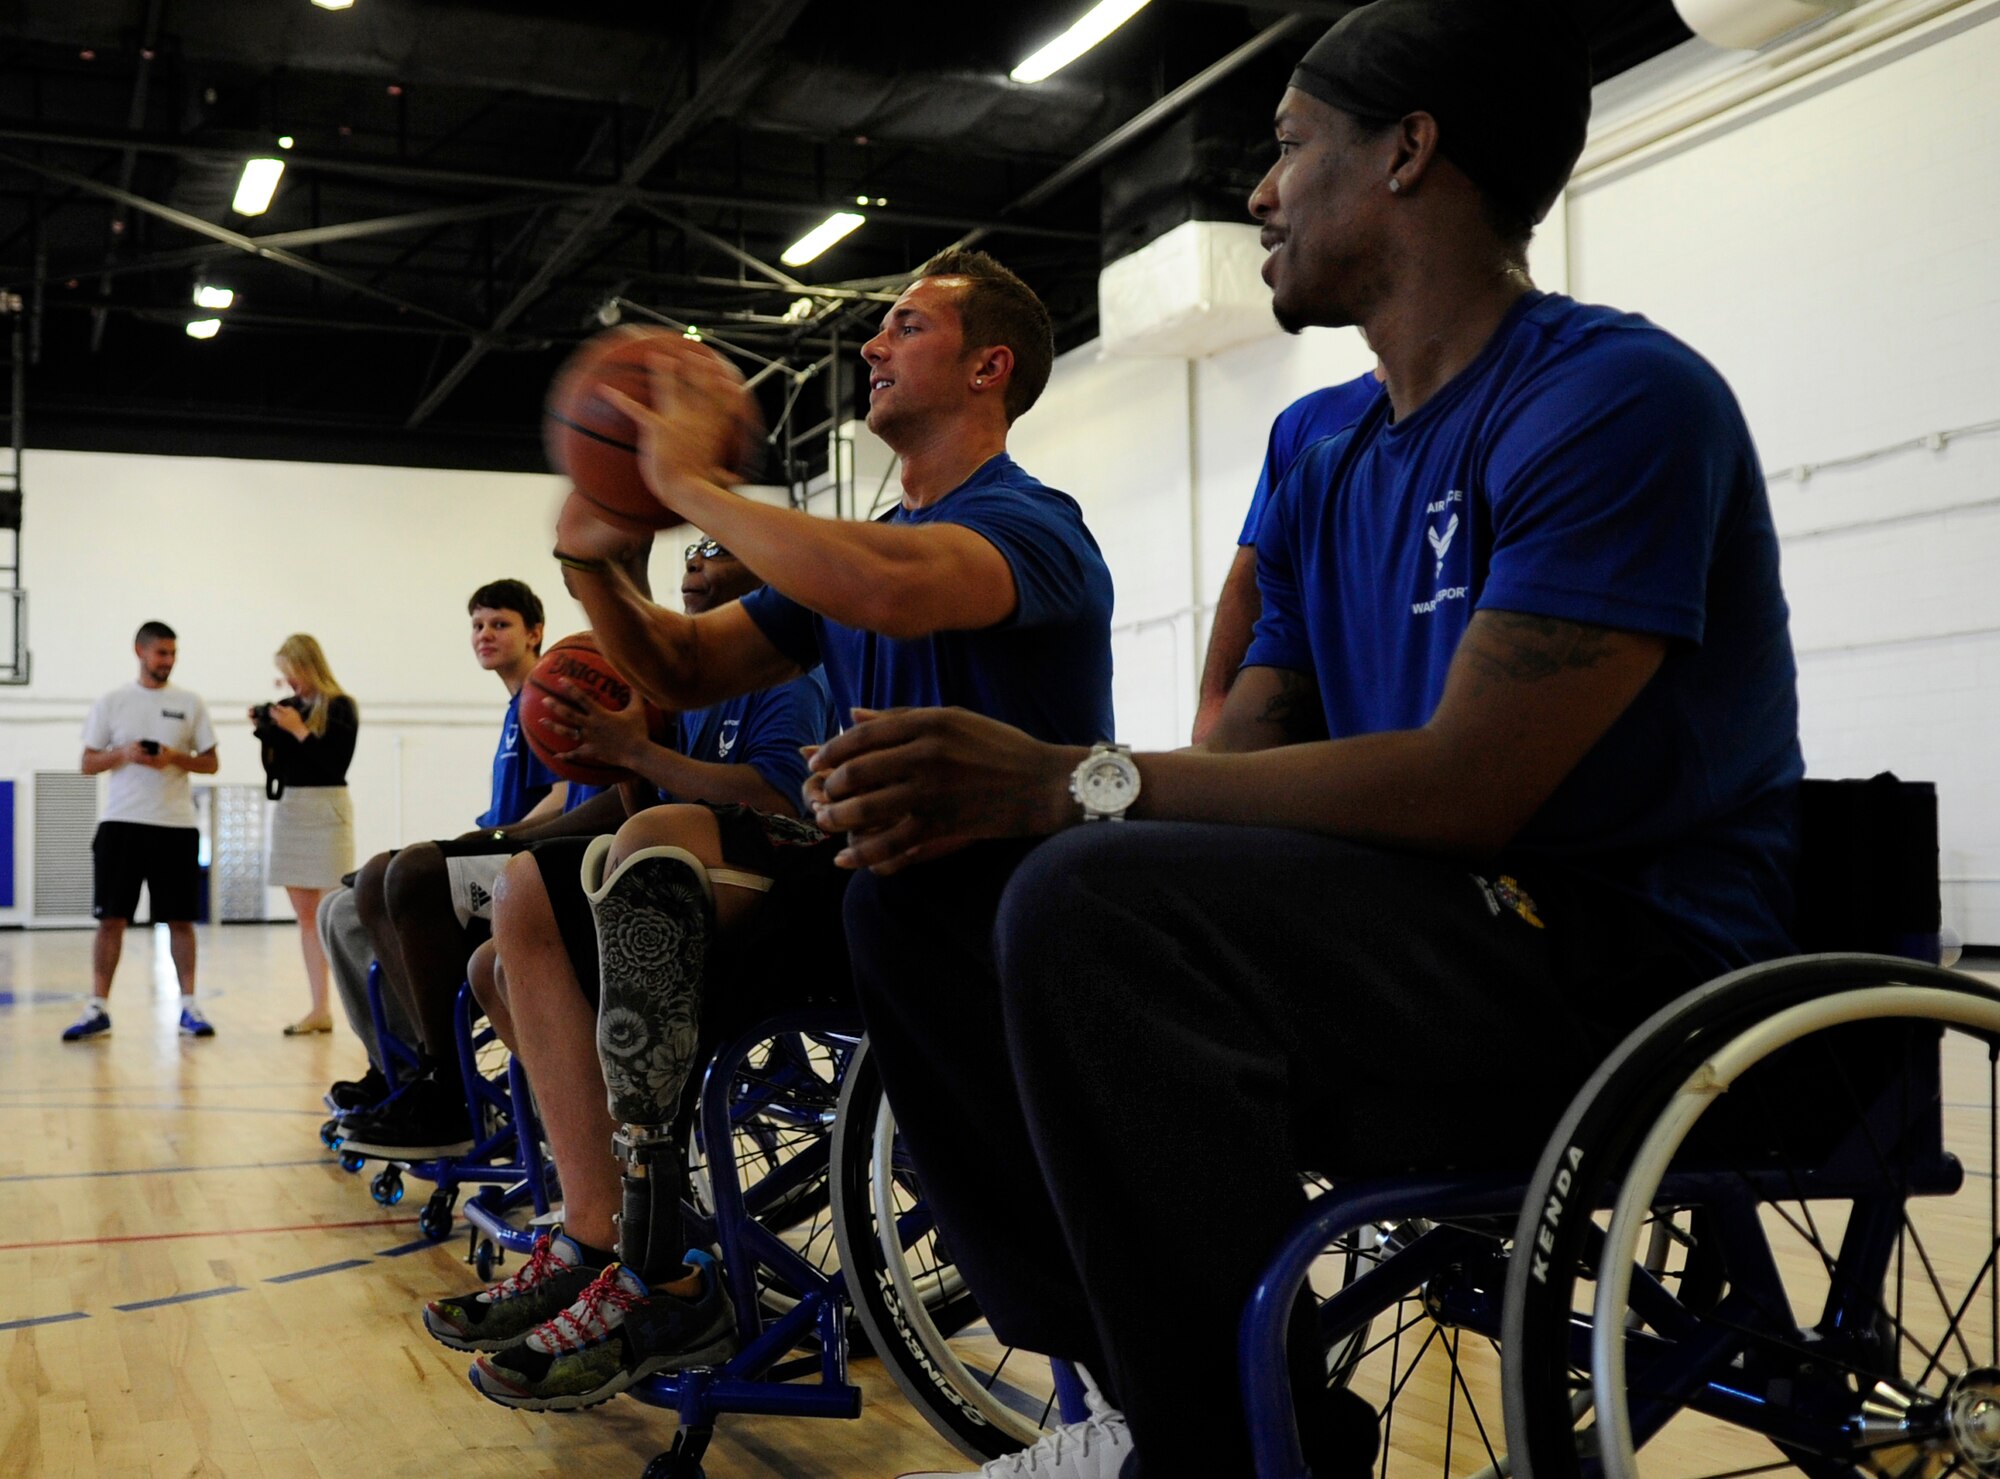 Wounded Warriors learn the fundamentals of wheelchair  basketball prior to playing a game during an Air Force Wounded Warrior Adaptive Sports Training Camp at the West Fitness Center at Joint Base Andrews, Md., June 26, 2013. (U.S. Air Force photo/Senior Airman Lauren Main)